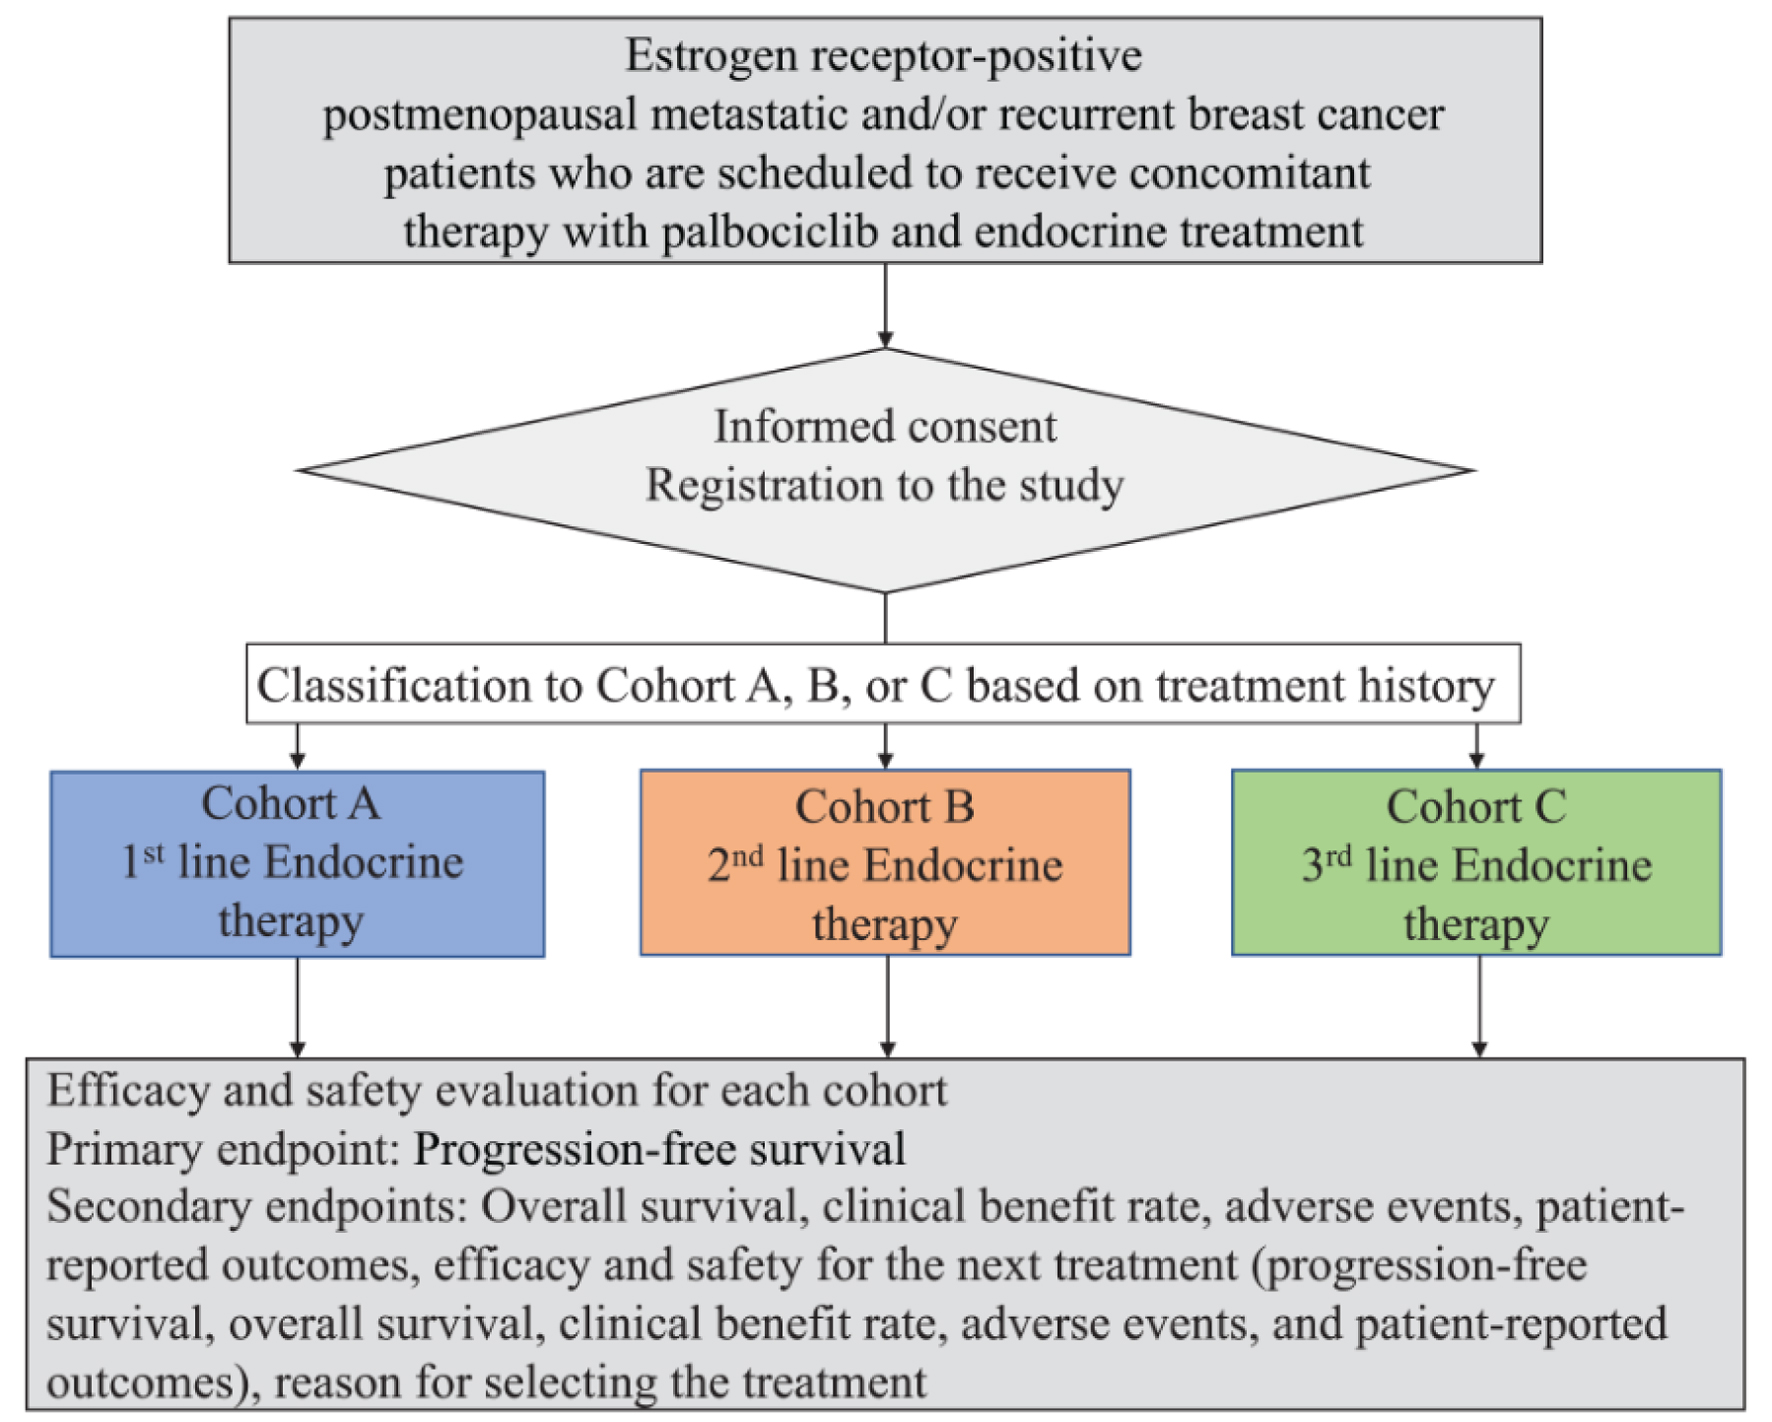 Prospective Cohort Study of Palbociclib Treatment in Postmenopausal Patients  With Unresectable and Metastatic Hormone Receptor-Positive Breast Cancer:  Study Protocol for a CSPOR-BC Palbociclib Cohort Trial, Narui